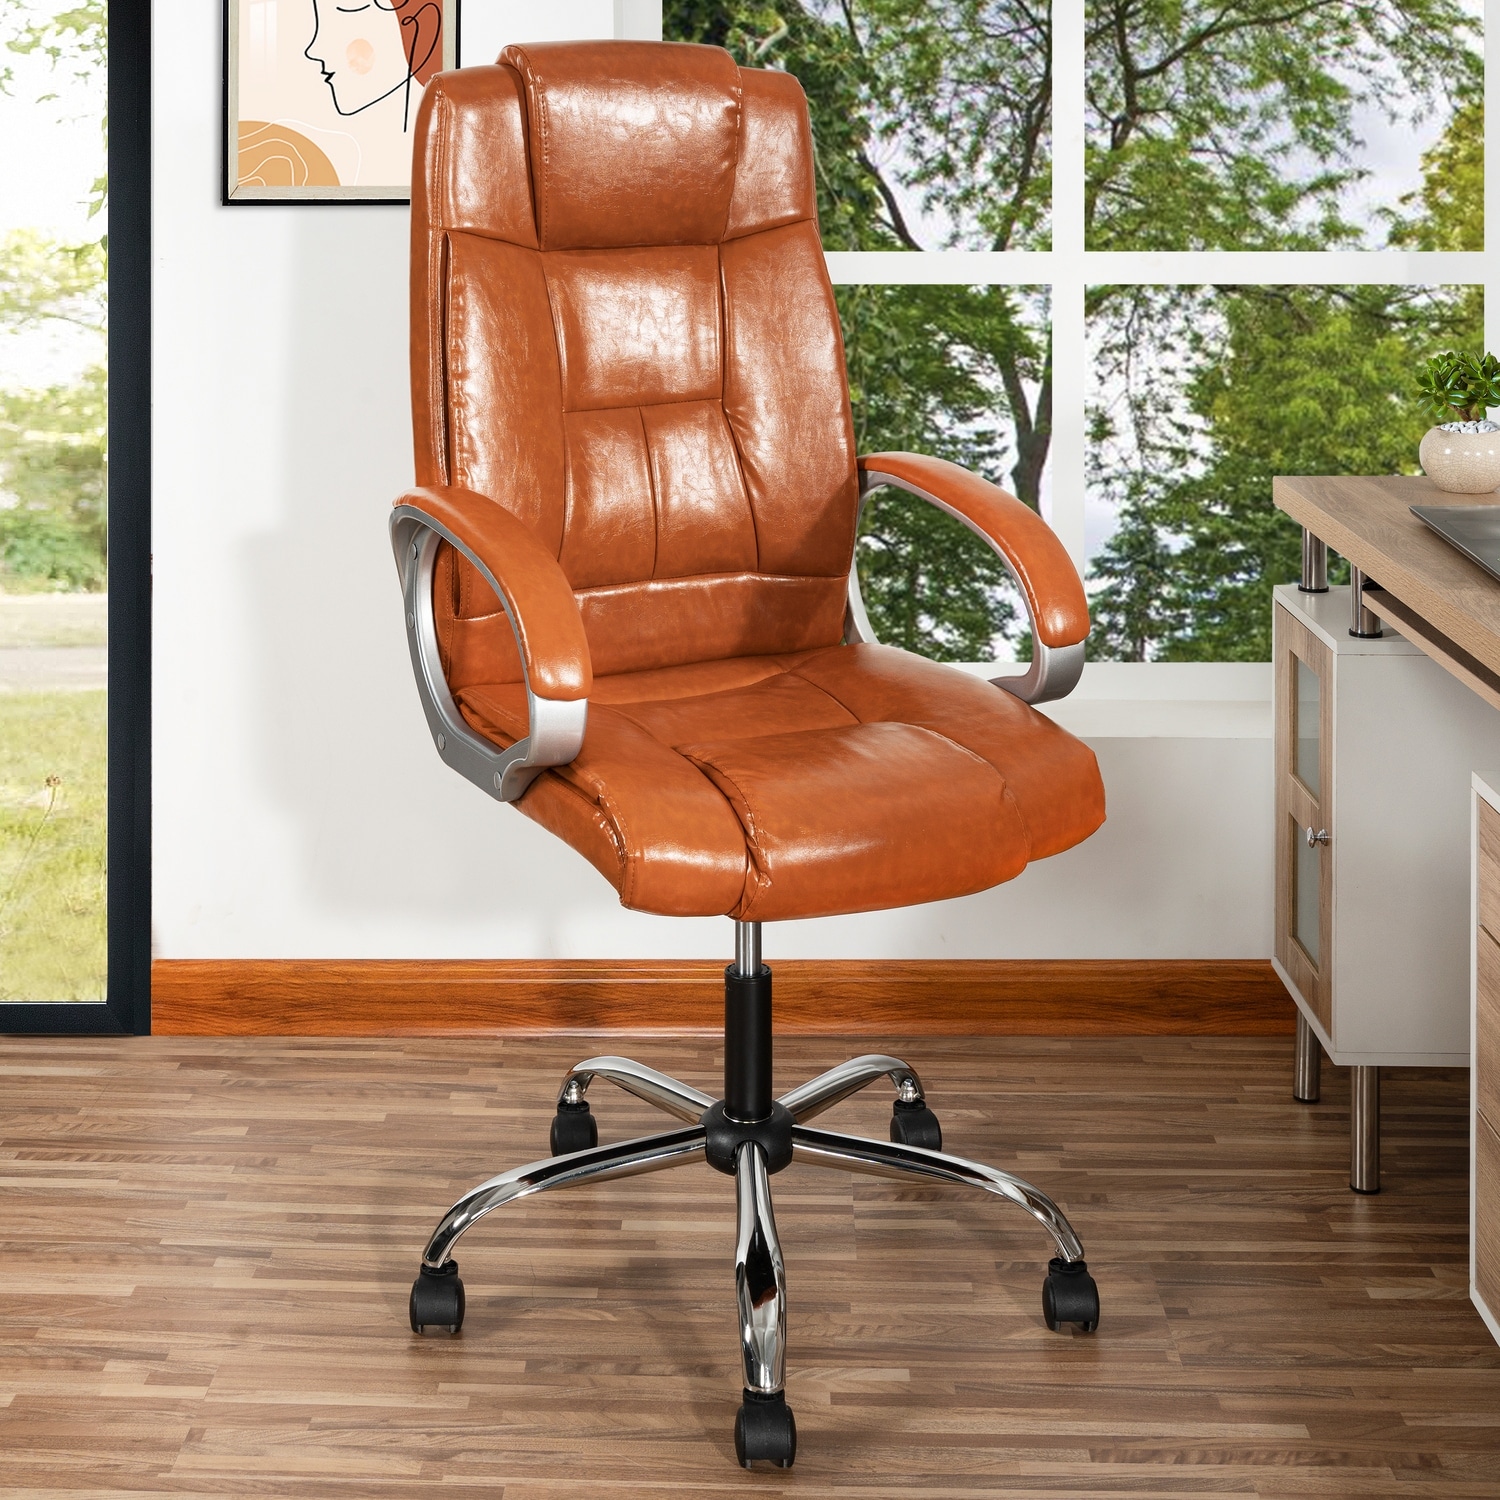 https://ak1.ostkcdn.com/images/products/is/images/direct/f0b6ddea21af8e1083dc023d4301c0ca055dcd19/Halle-Premium-Faux-Leather-High-Back-Executive-Office-Chair-with-Armrests-Lumbar-Support-Adjustable-Height%2C-Swivel-and-Lumbar.jpg